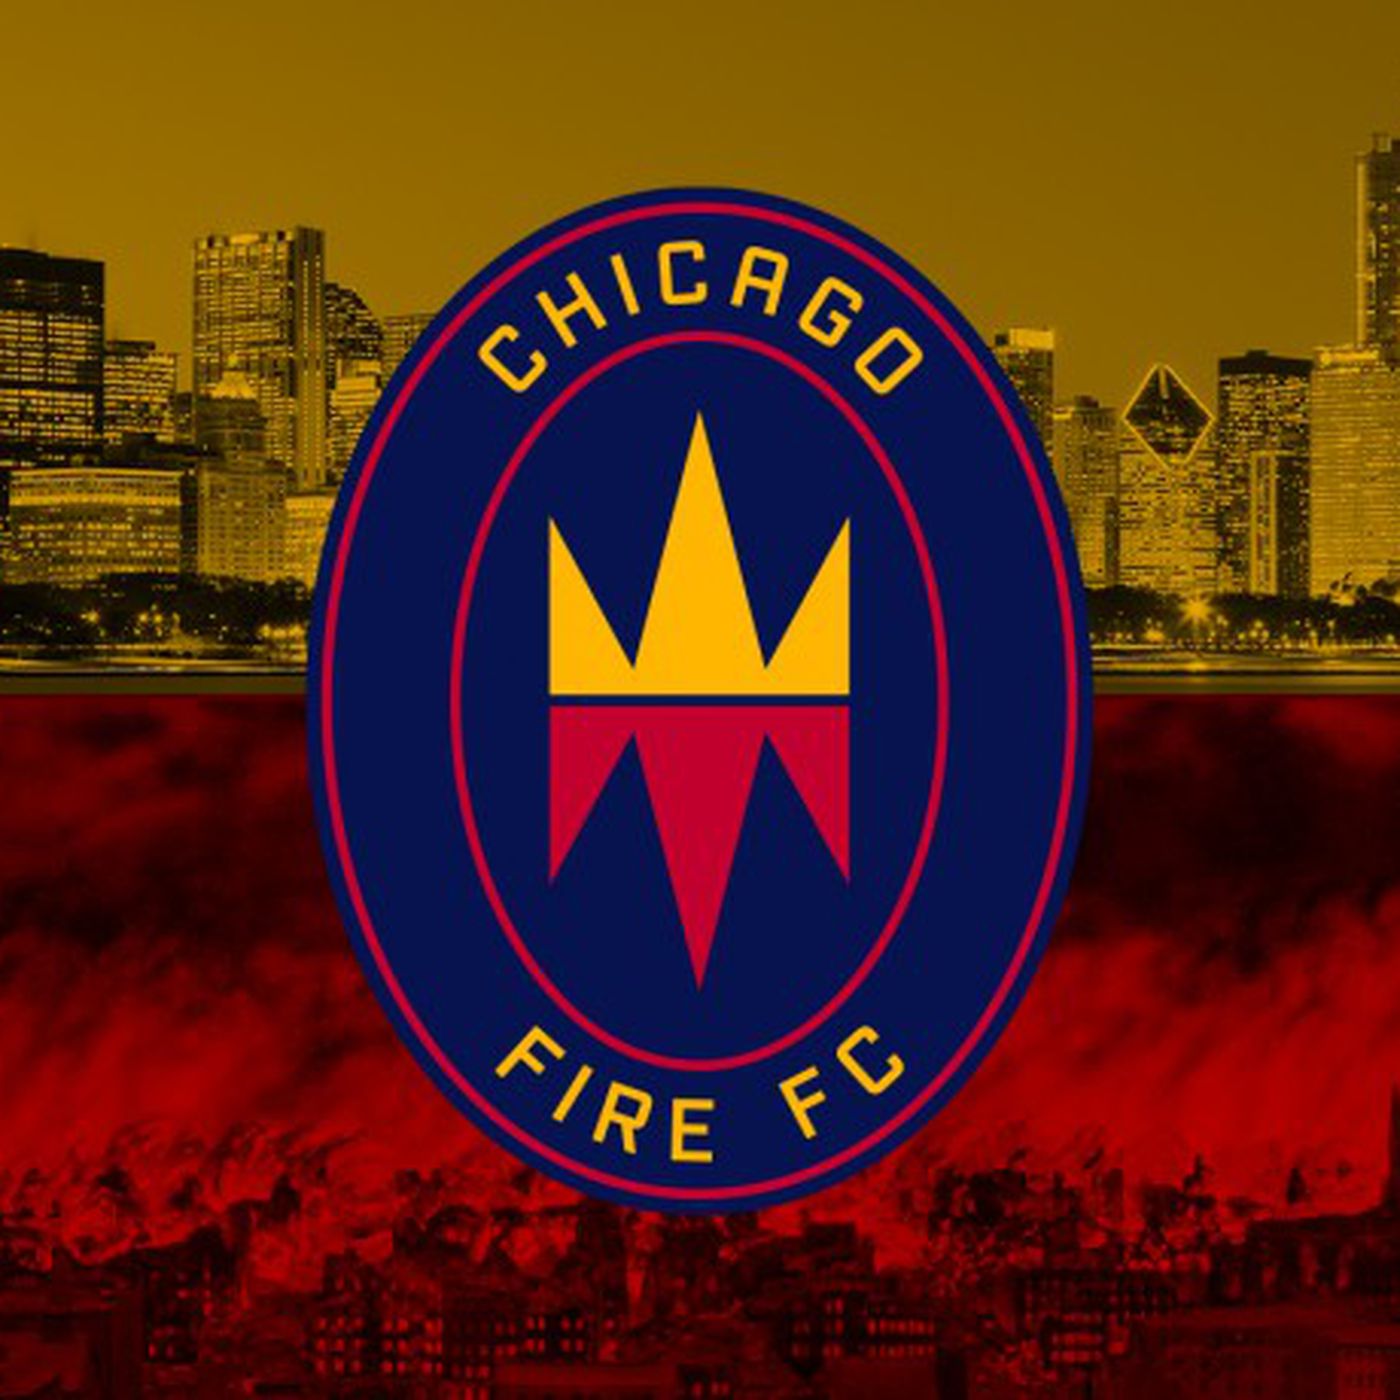 Chicago Fire officially dumping crown logo new design project